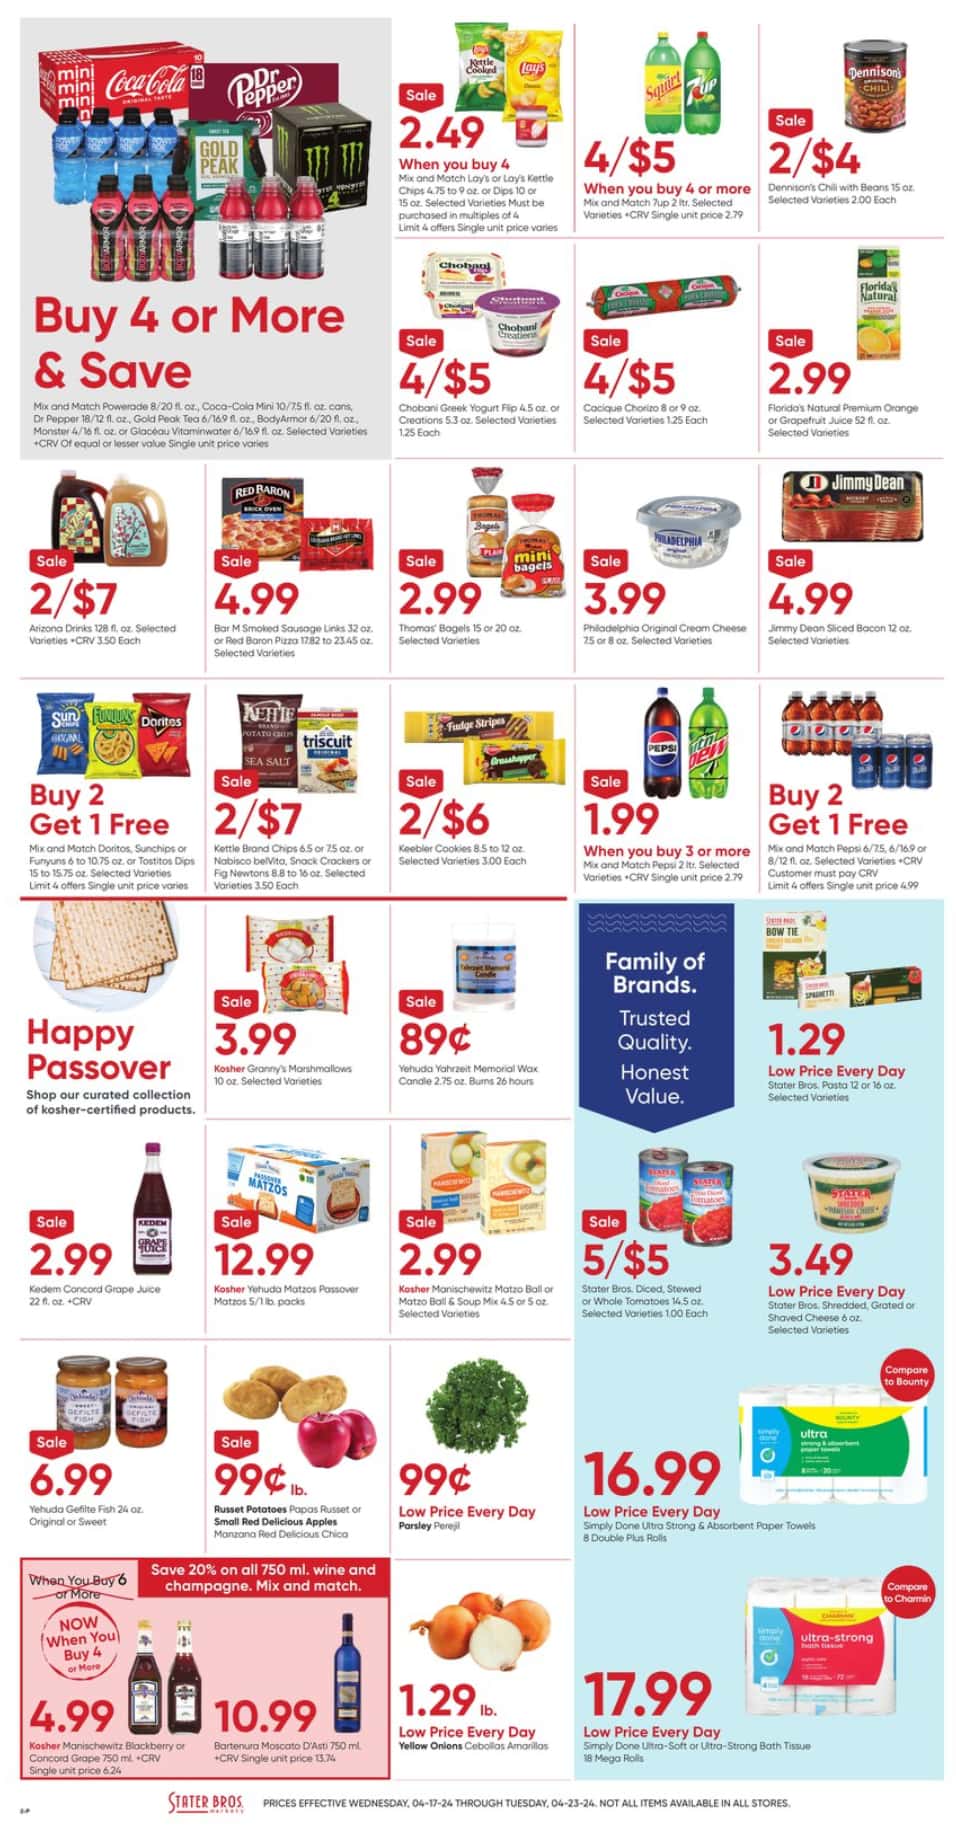 StaterBros_weekly_ad_041724_02